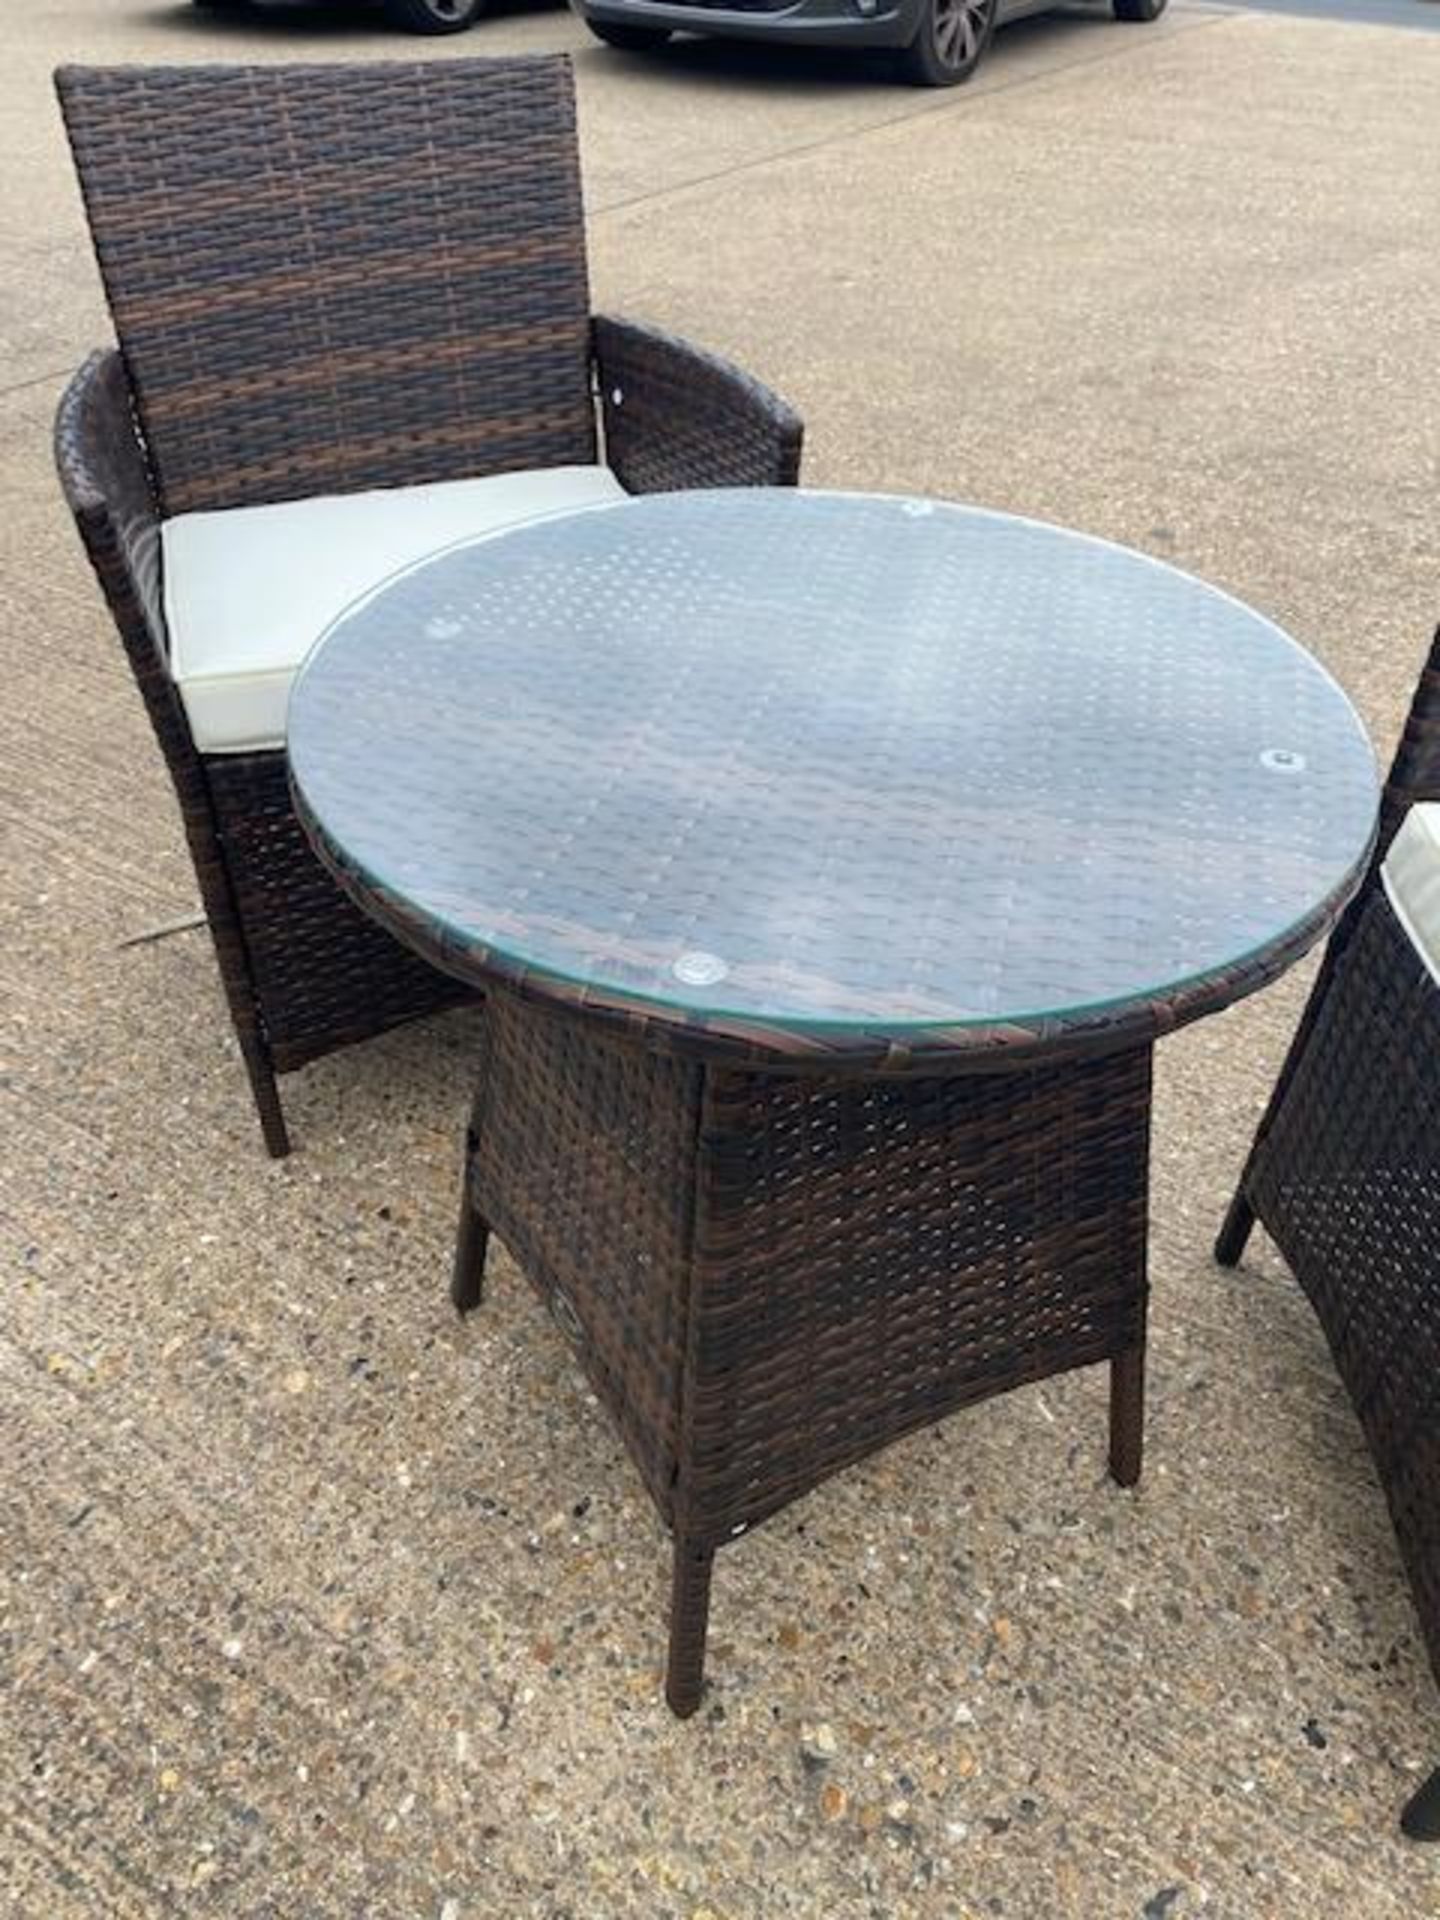 + VAT Brand New Chelsea Garden Company Two Person Dining Set -Item Is Immediatley Available - - Image 4 of 5